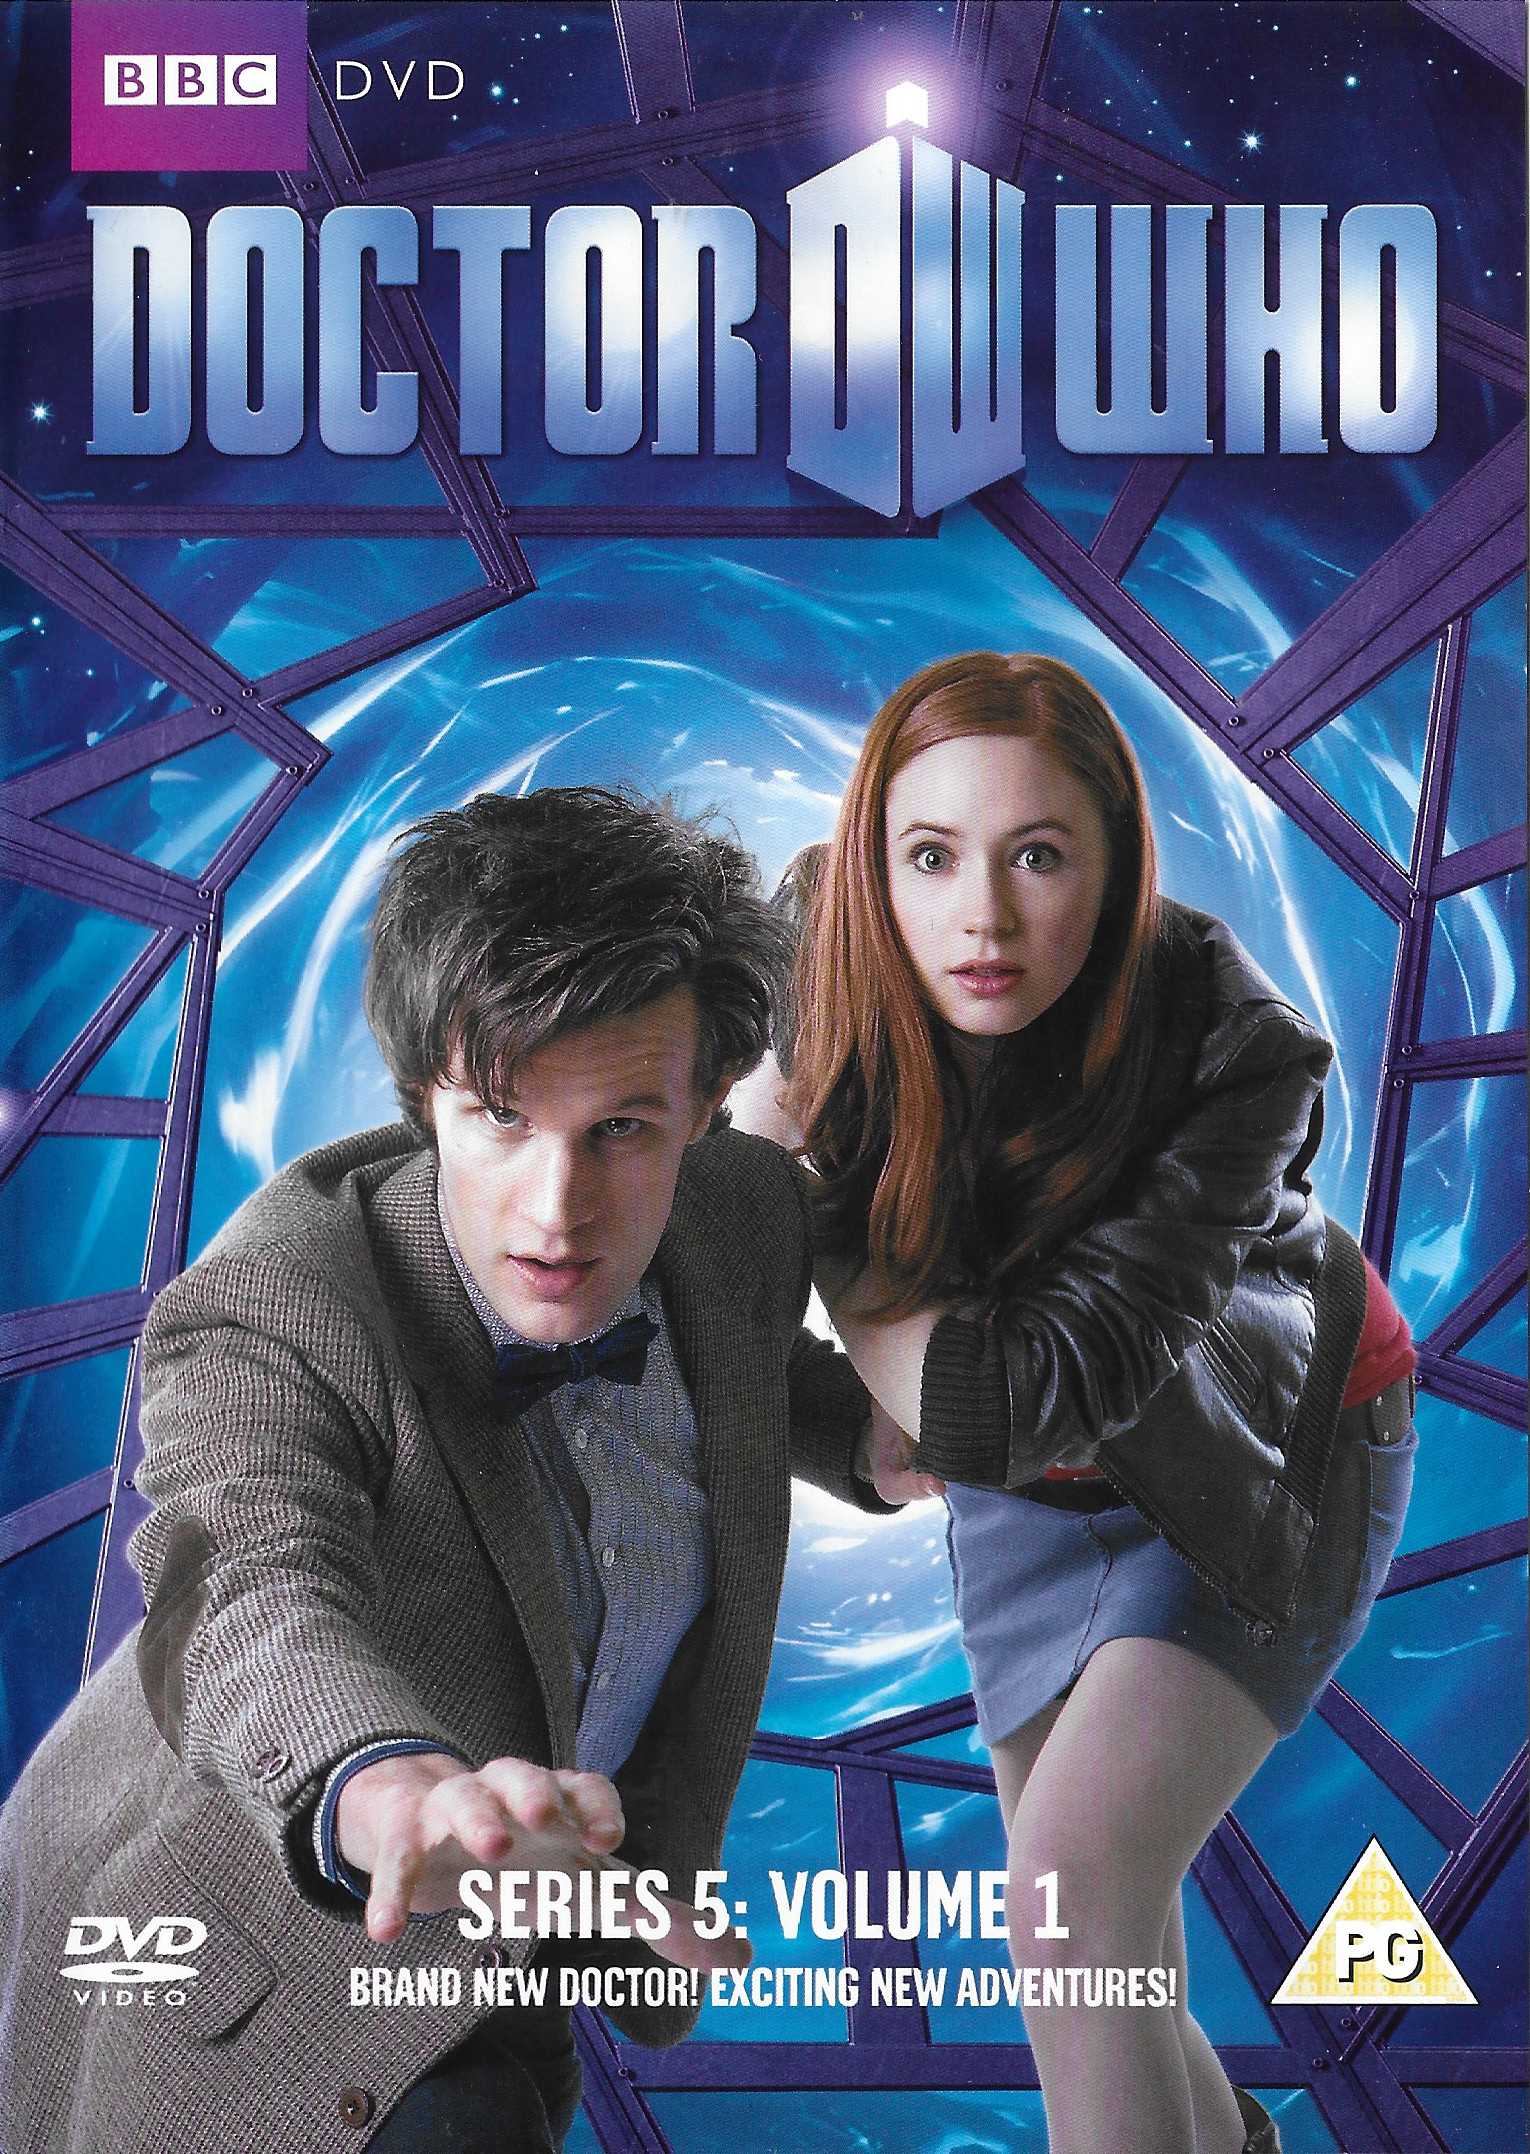 Picture of BBCDVD 3213 Doctor Who - Series 5, volume 1 by artist Steven Moffat / Mark Gatiss from the BBC dvds - Records and Tapes library